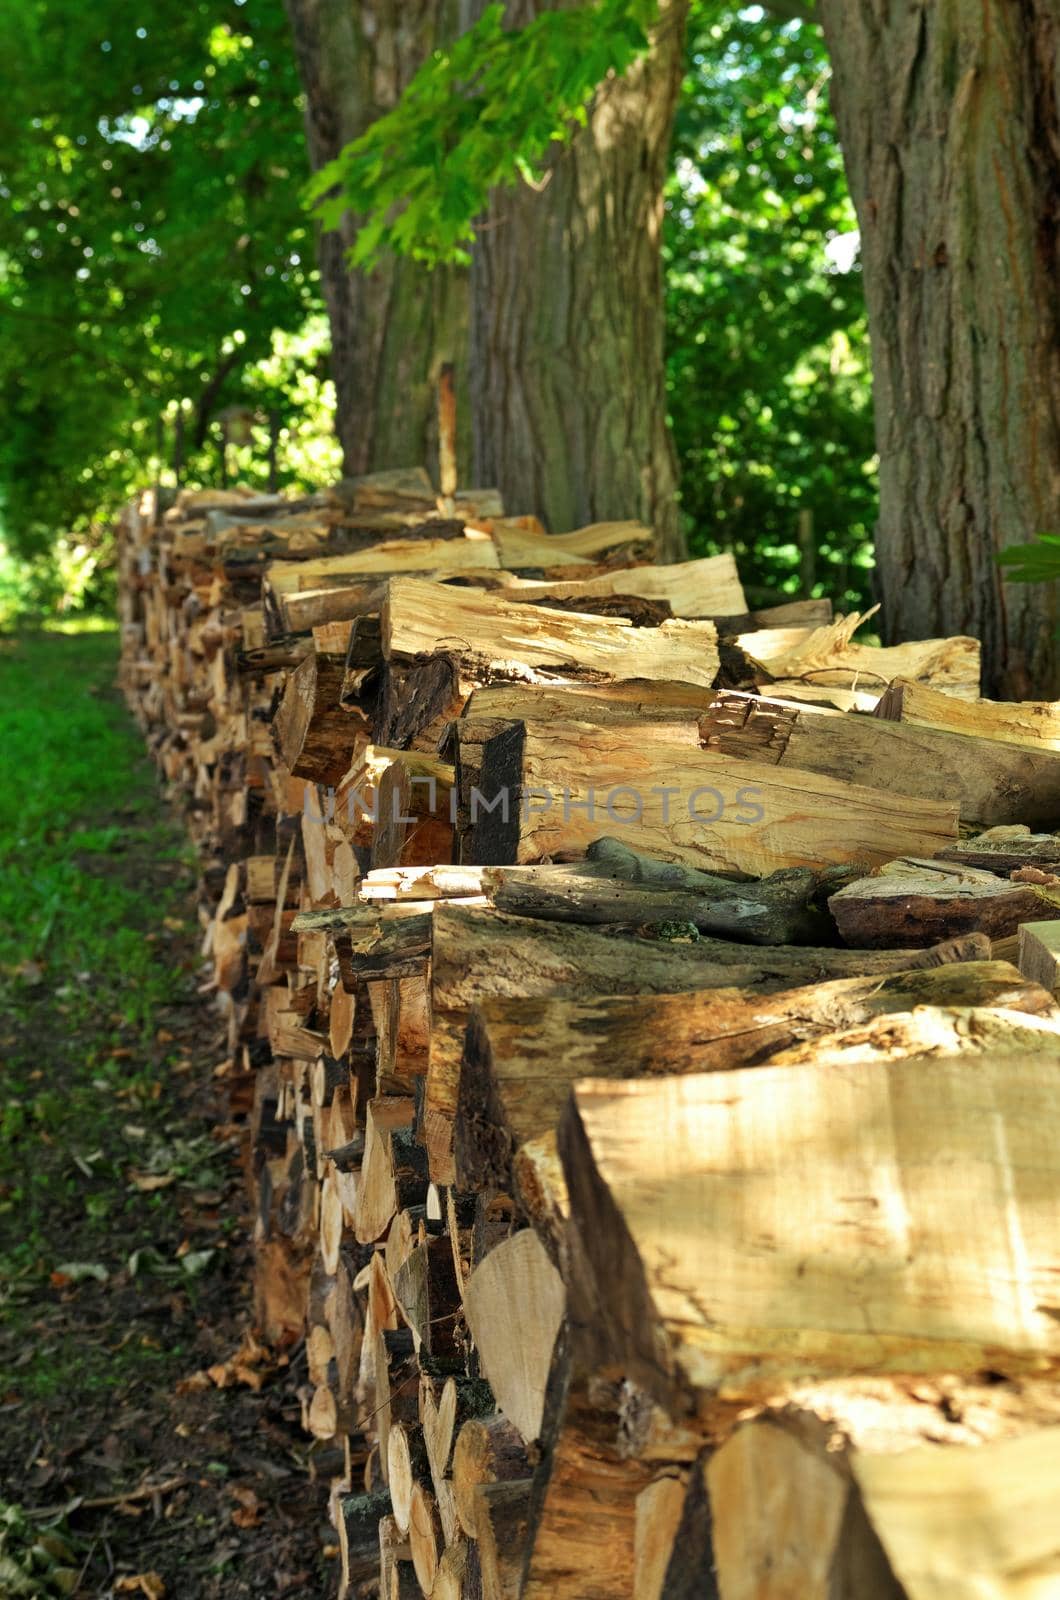 Chopped Split Firewood Piled and Stacked Beneath Maple Trees in the Summer Time by markvandam